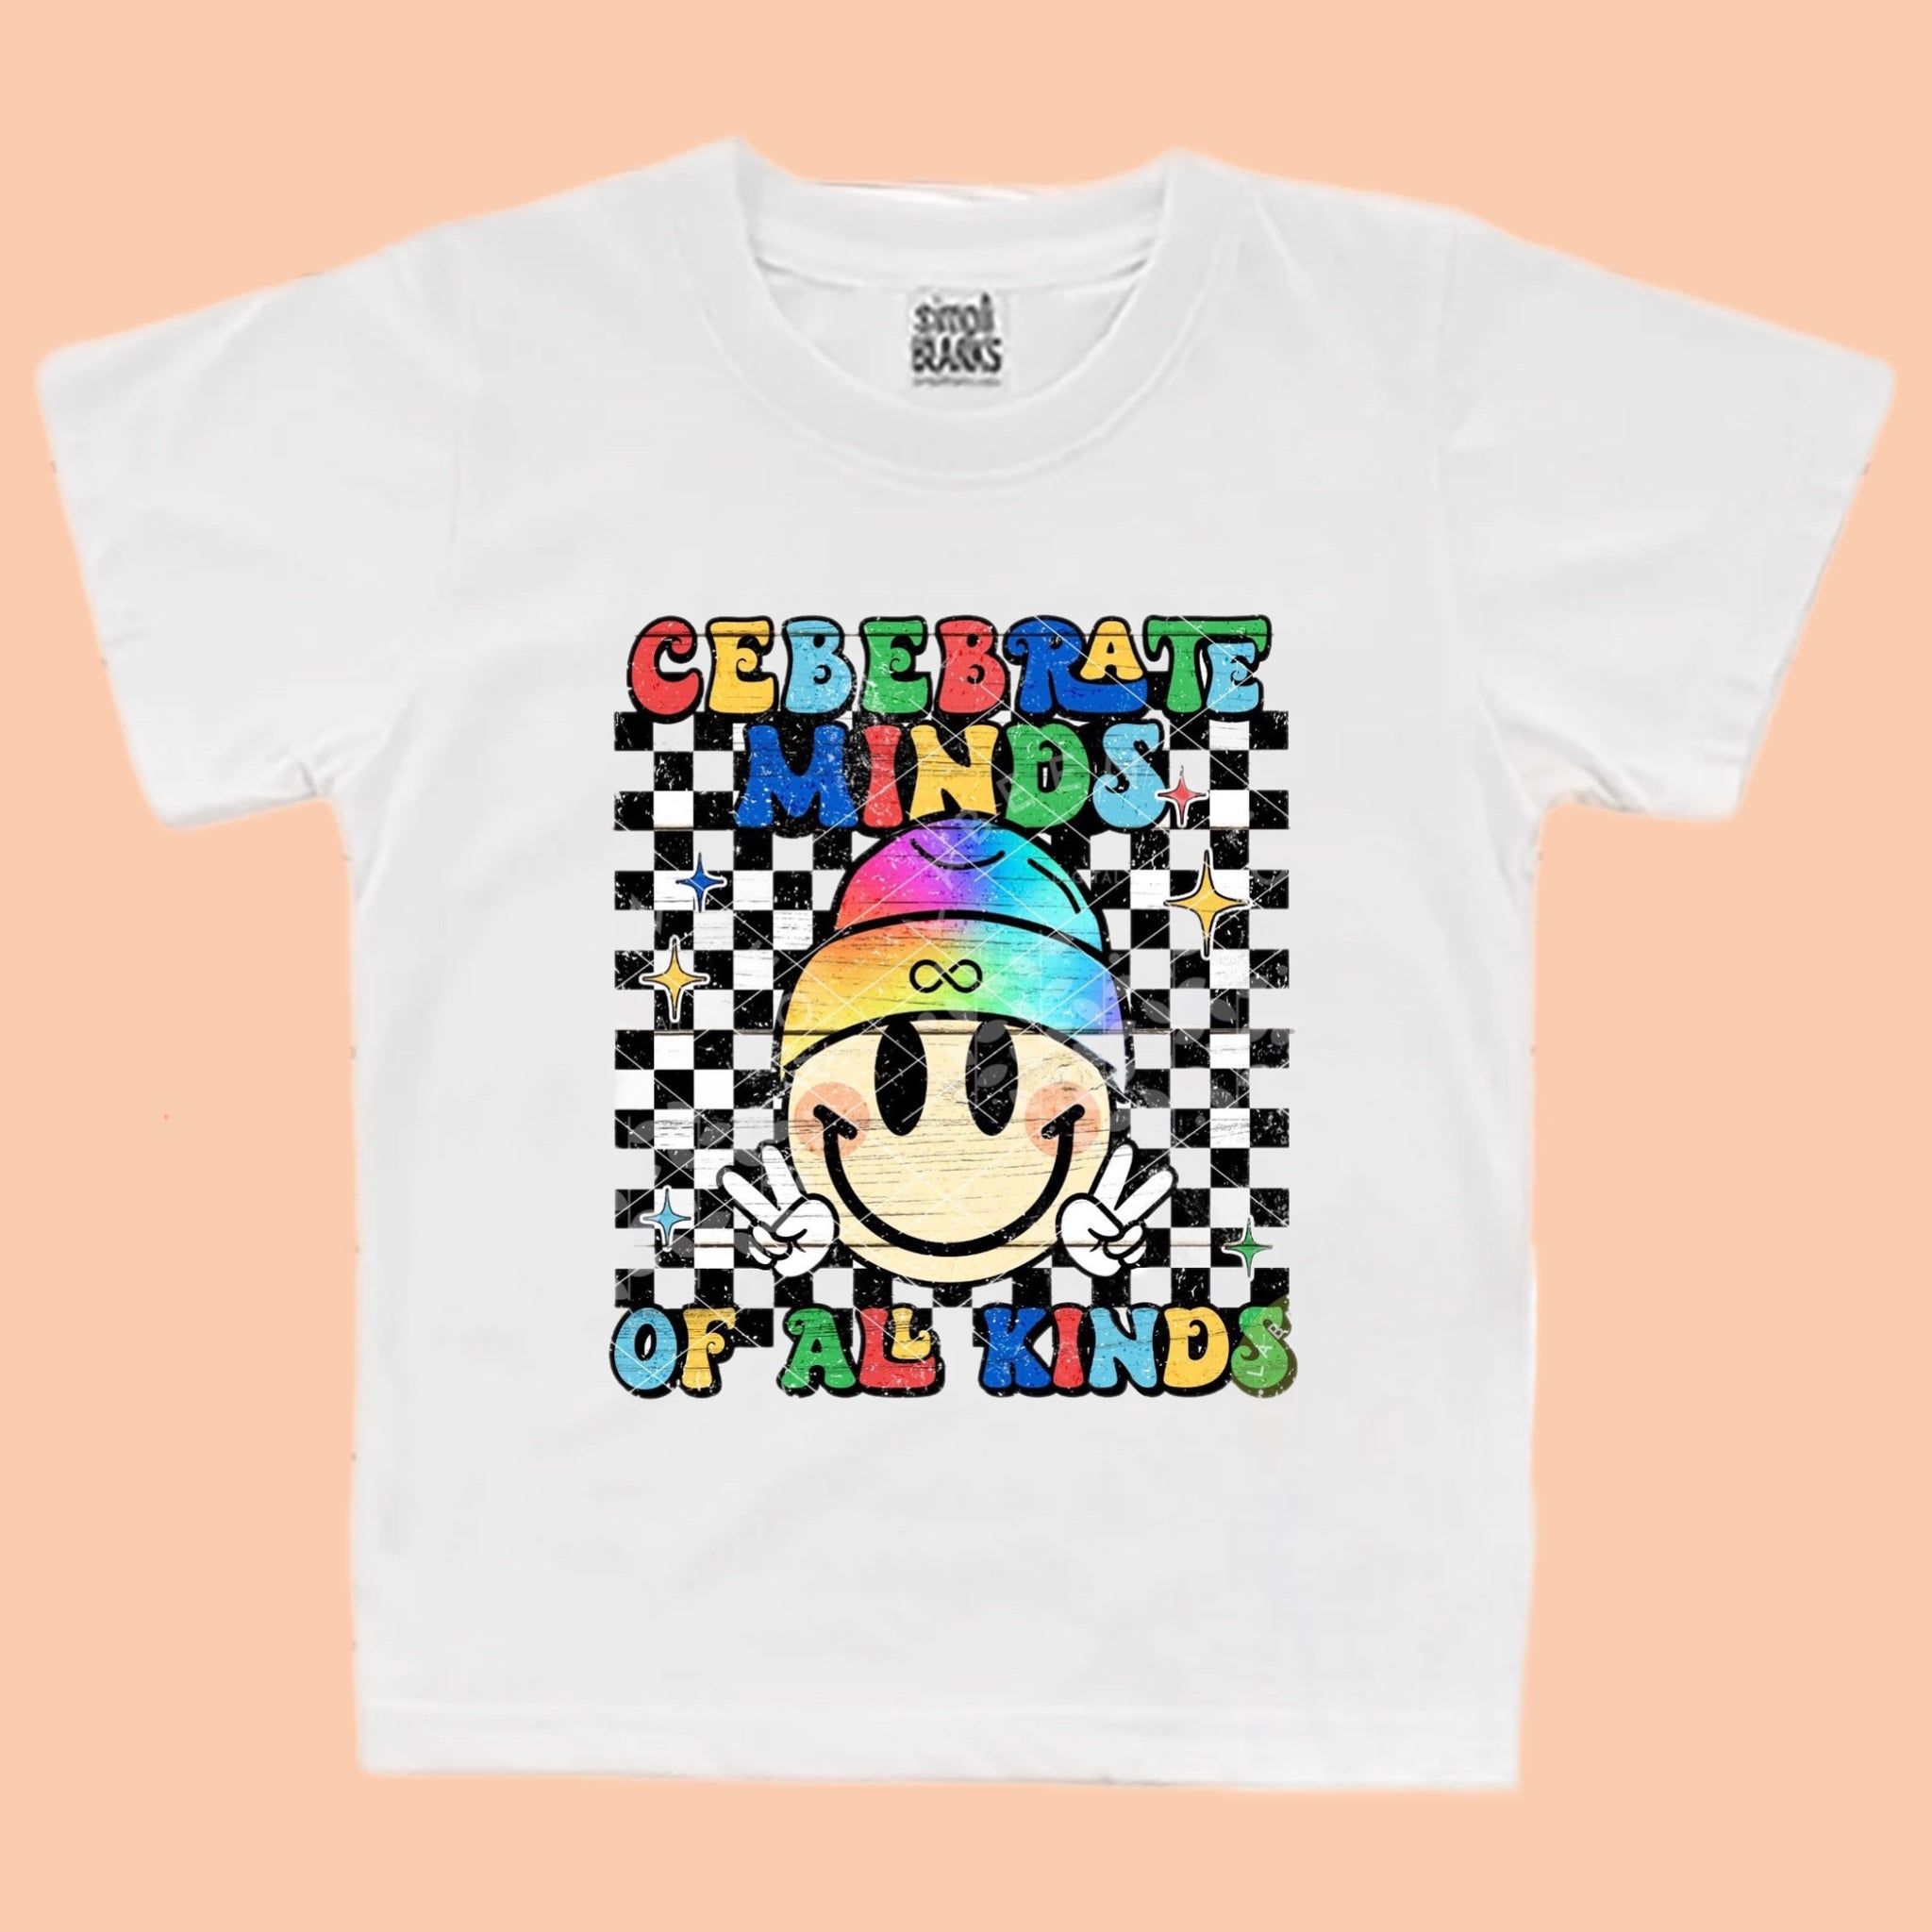 Celebrate minds of all kinds smiley t-shirt